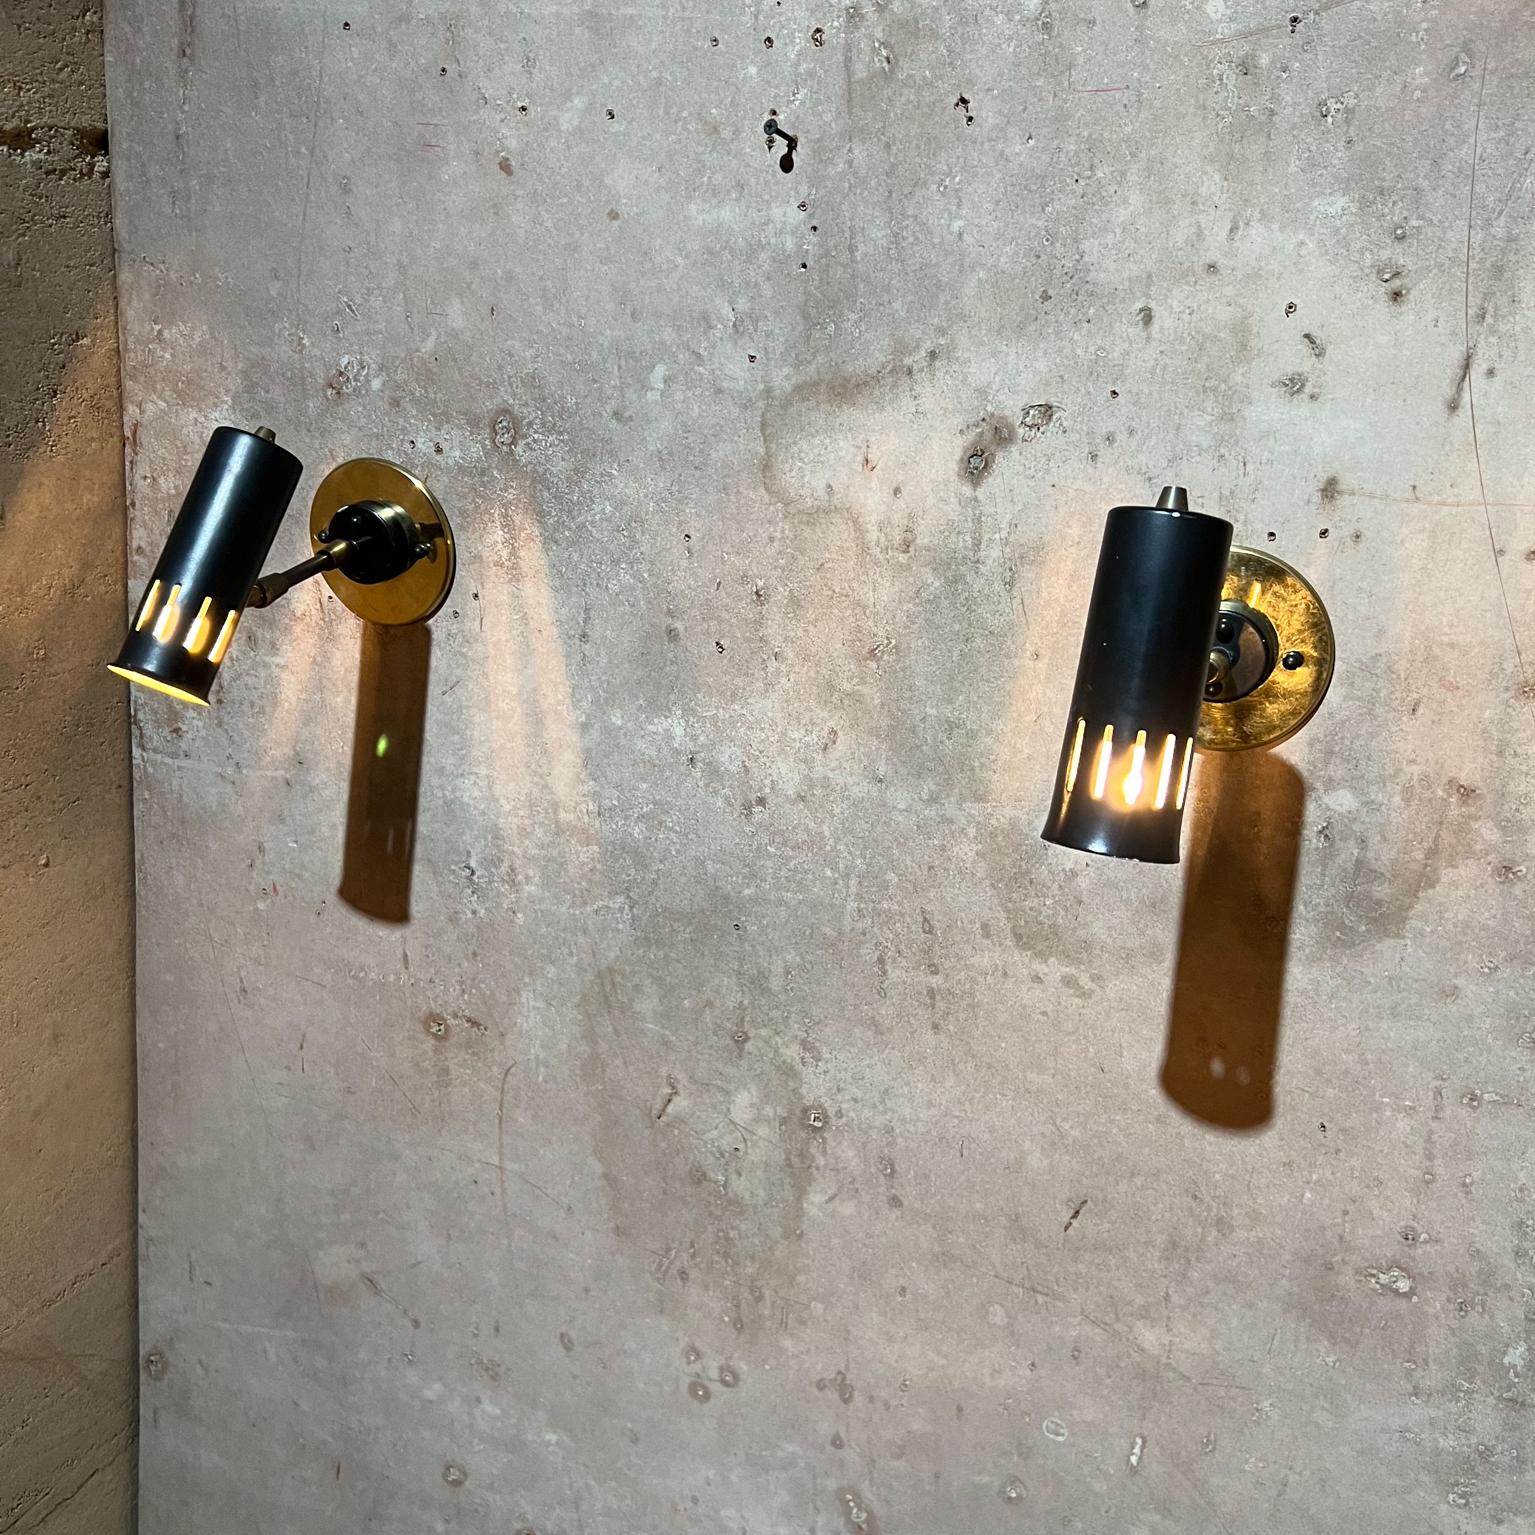 1960s Modern Stilnovo Sconce Italy Retrofit new brass backplate (6 available)
Unmarked
6 sconces are available
Listed price is per sconce unit.
Preowned vintage condition rewired, tested and working. Retrofitted with brass backplate to meet US